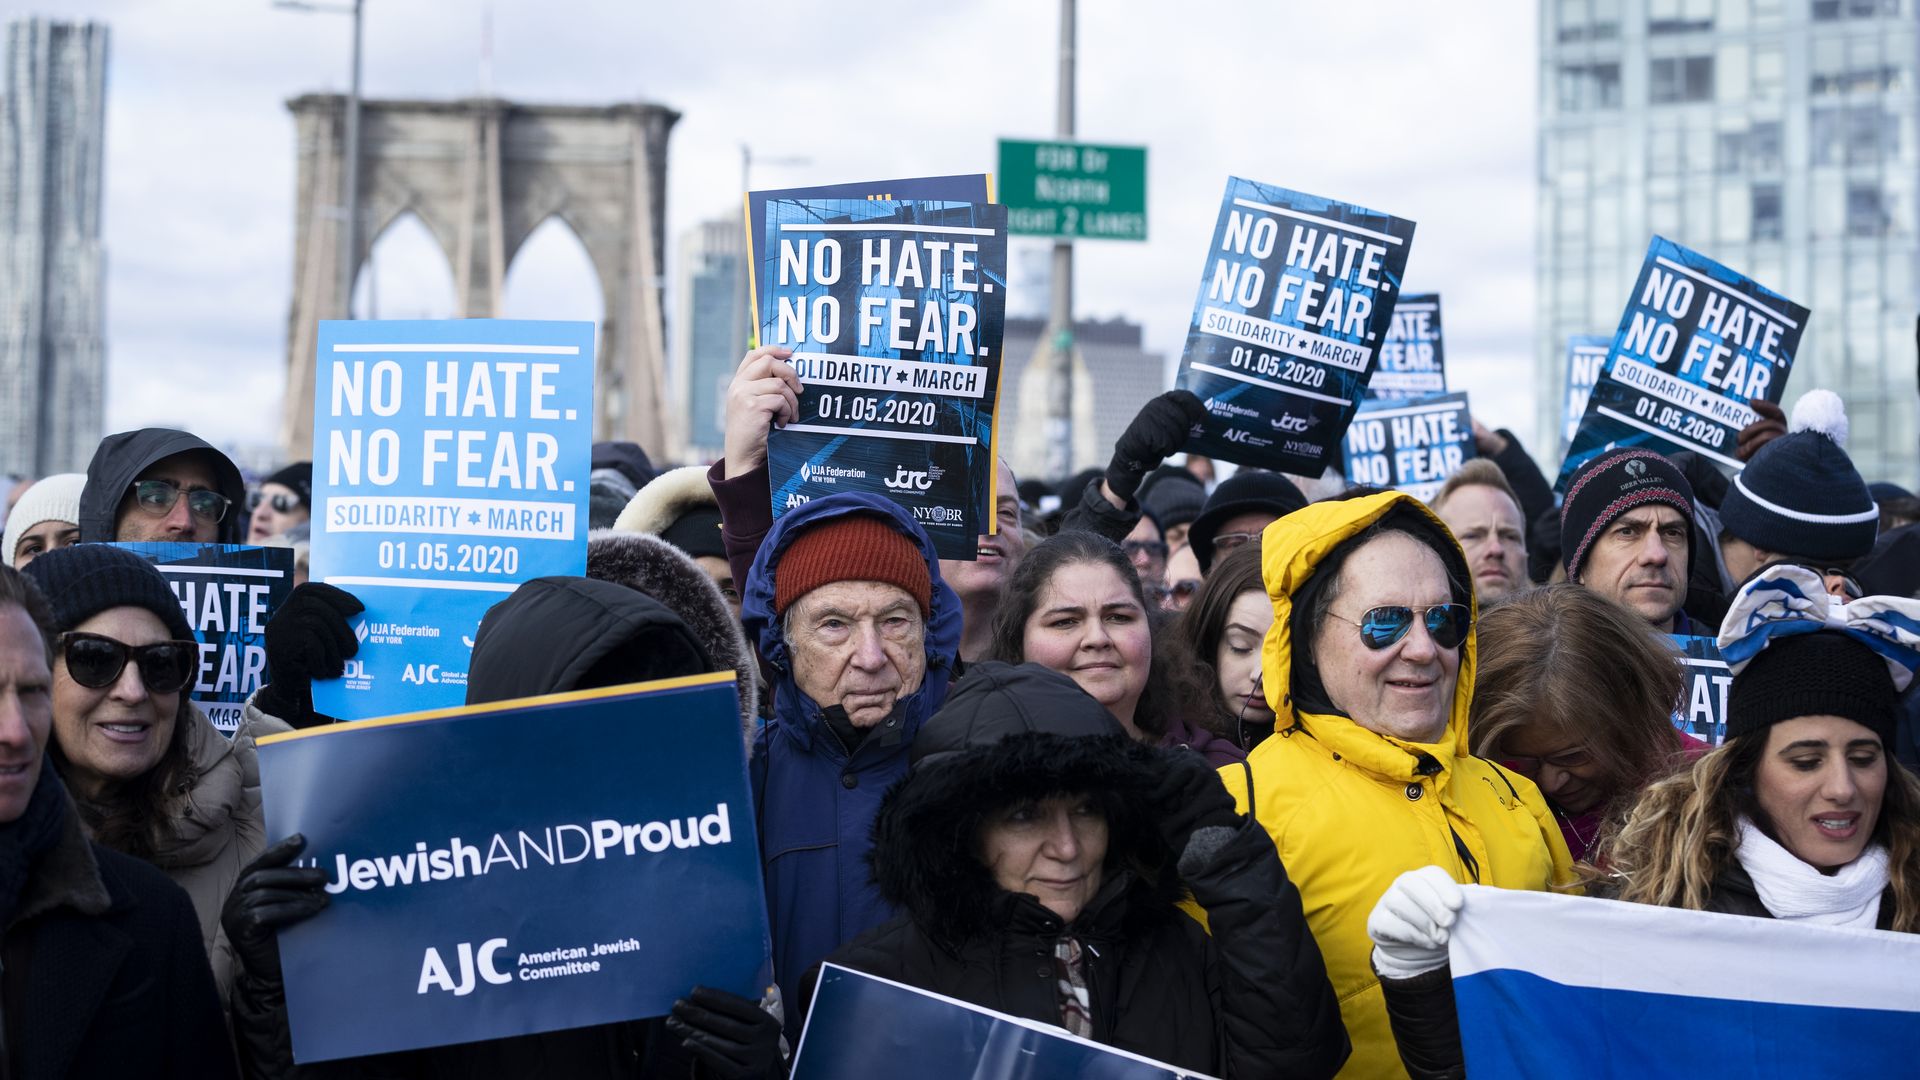 Marchers hold signs that reads "No Hate No Fear" and "Jewish and Proud" as they walk across the Brooklyn Bridge